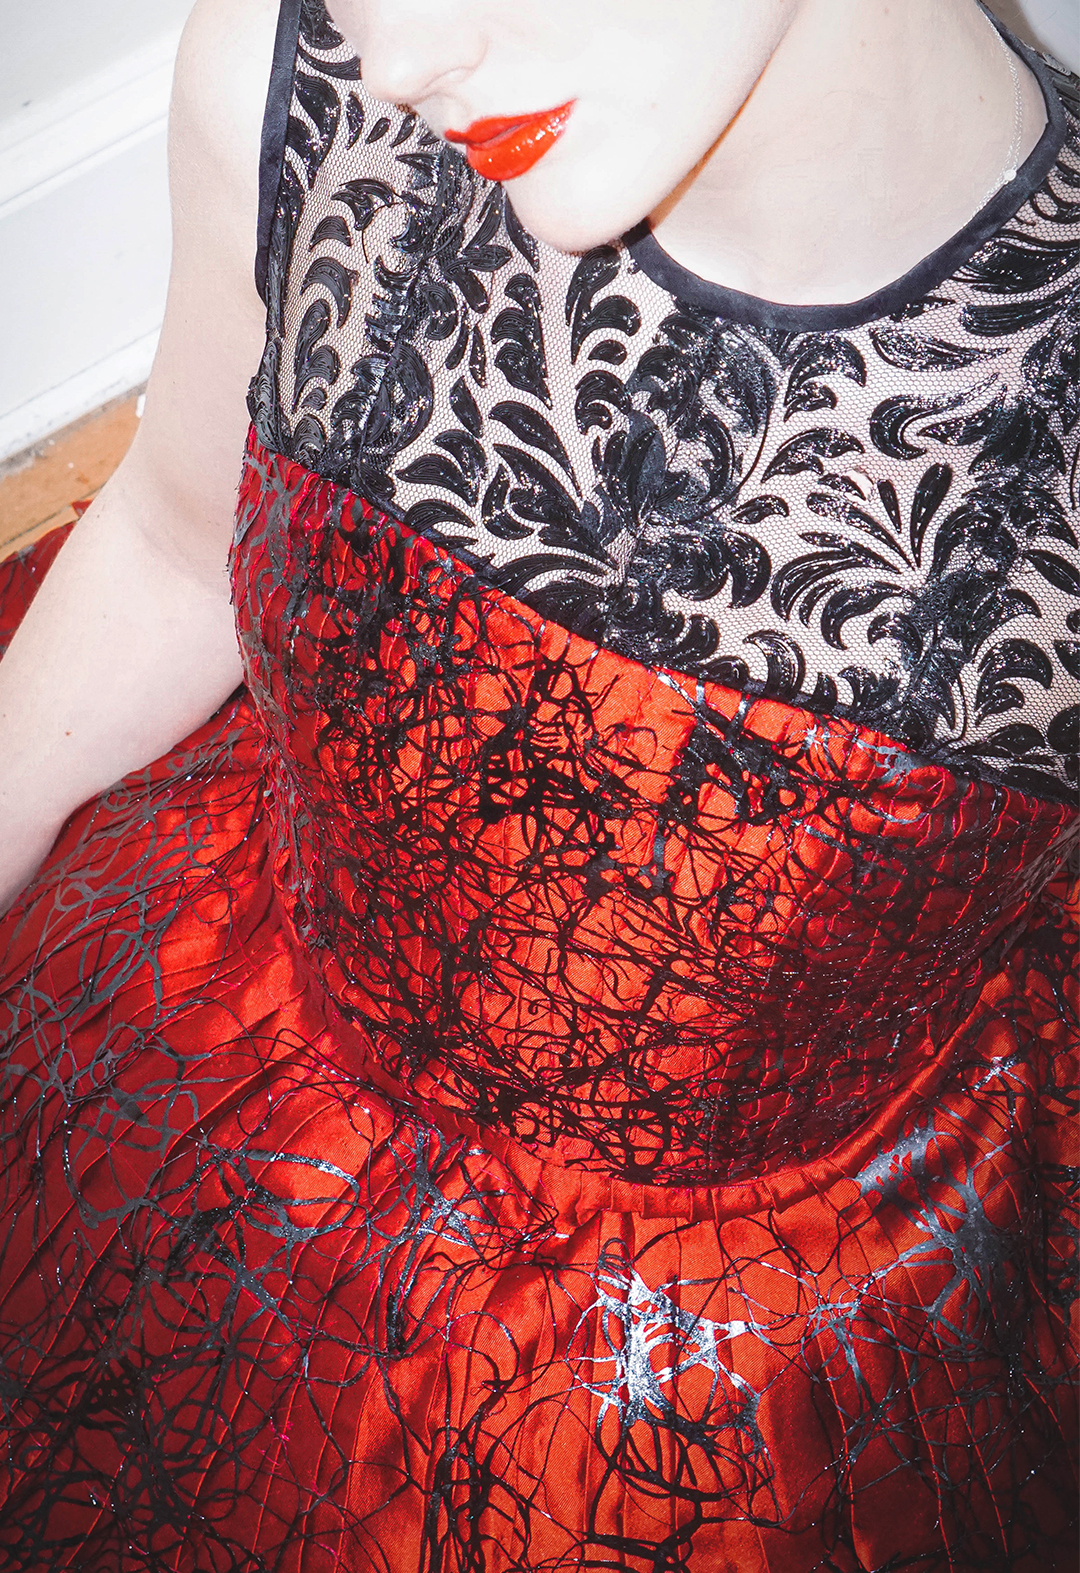 Extreme close-up photo shows the 3D-printed lace mesh at the neckline of the garment.